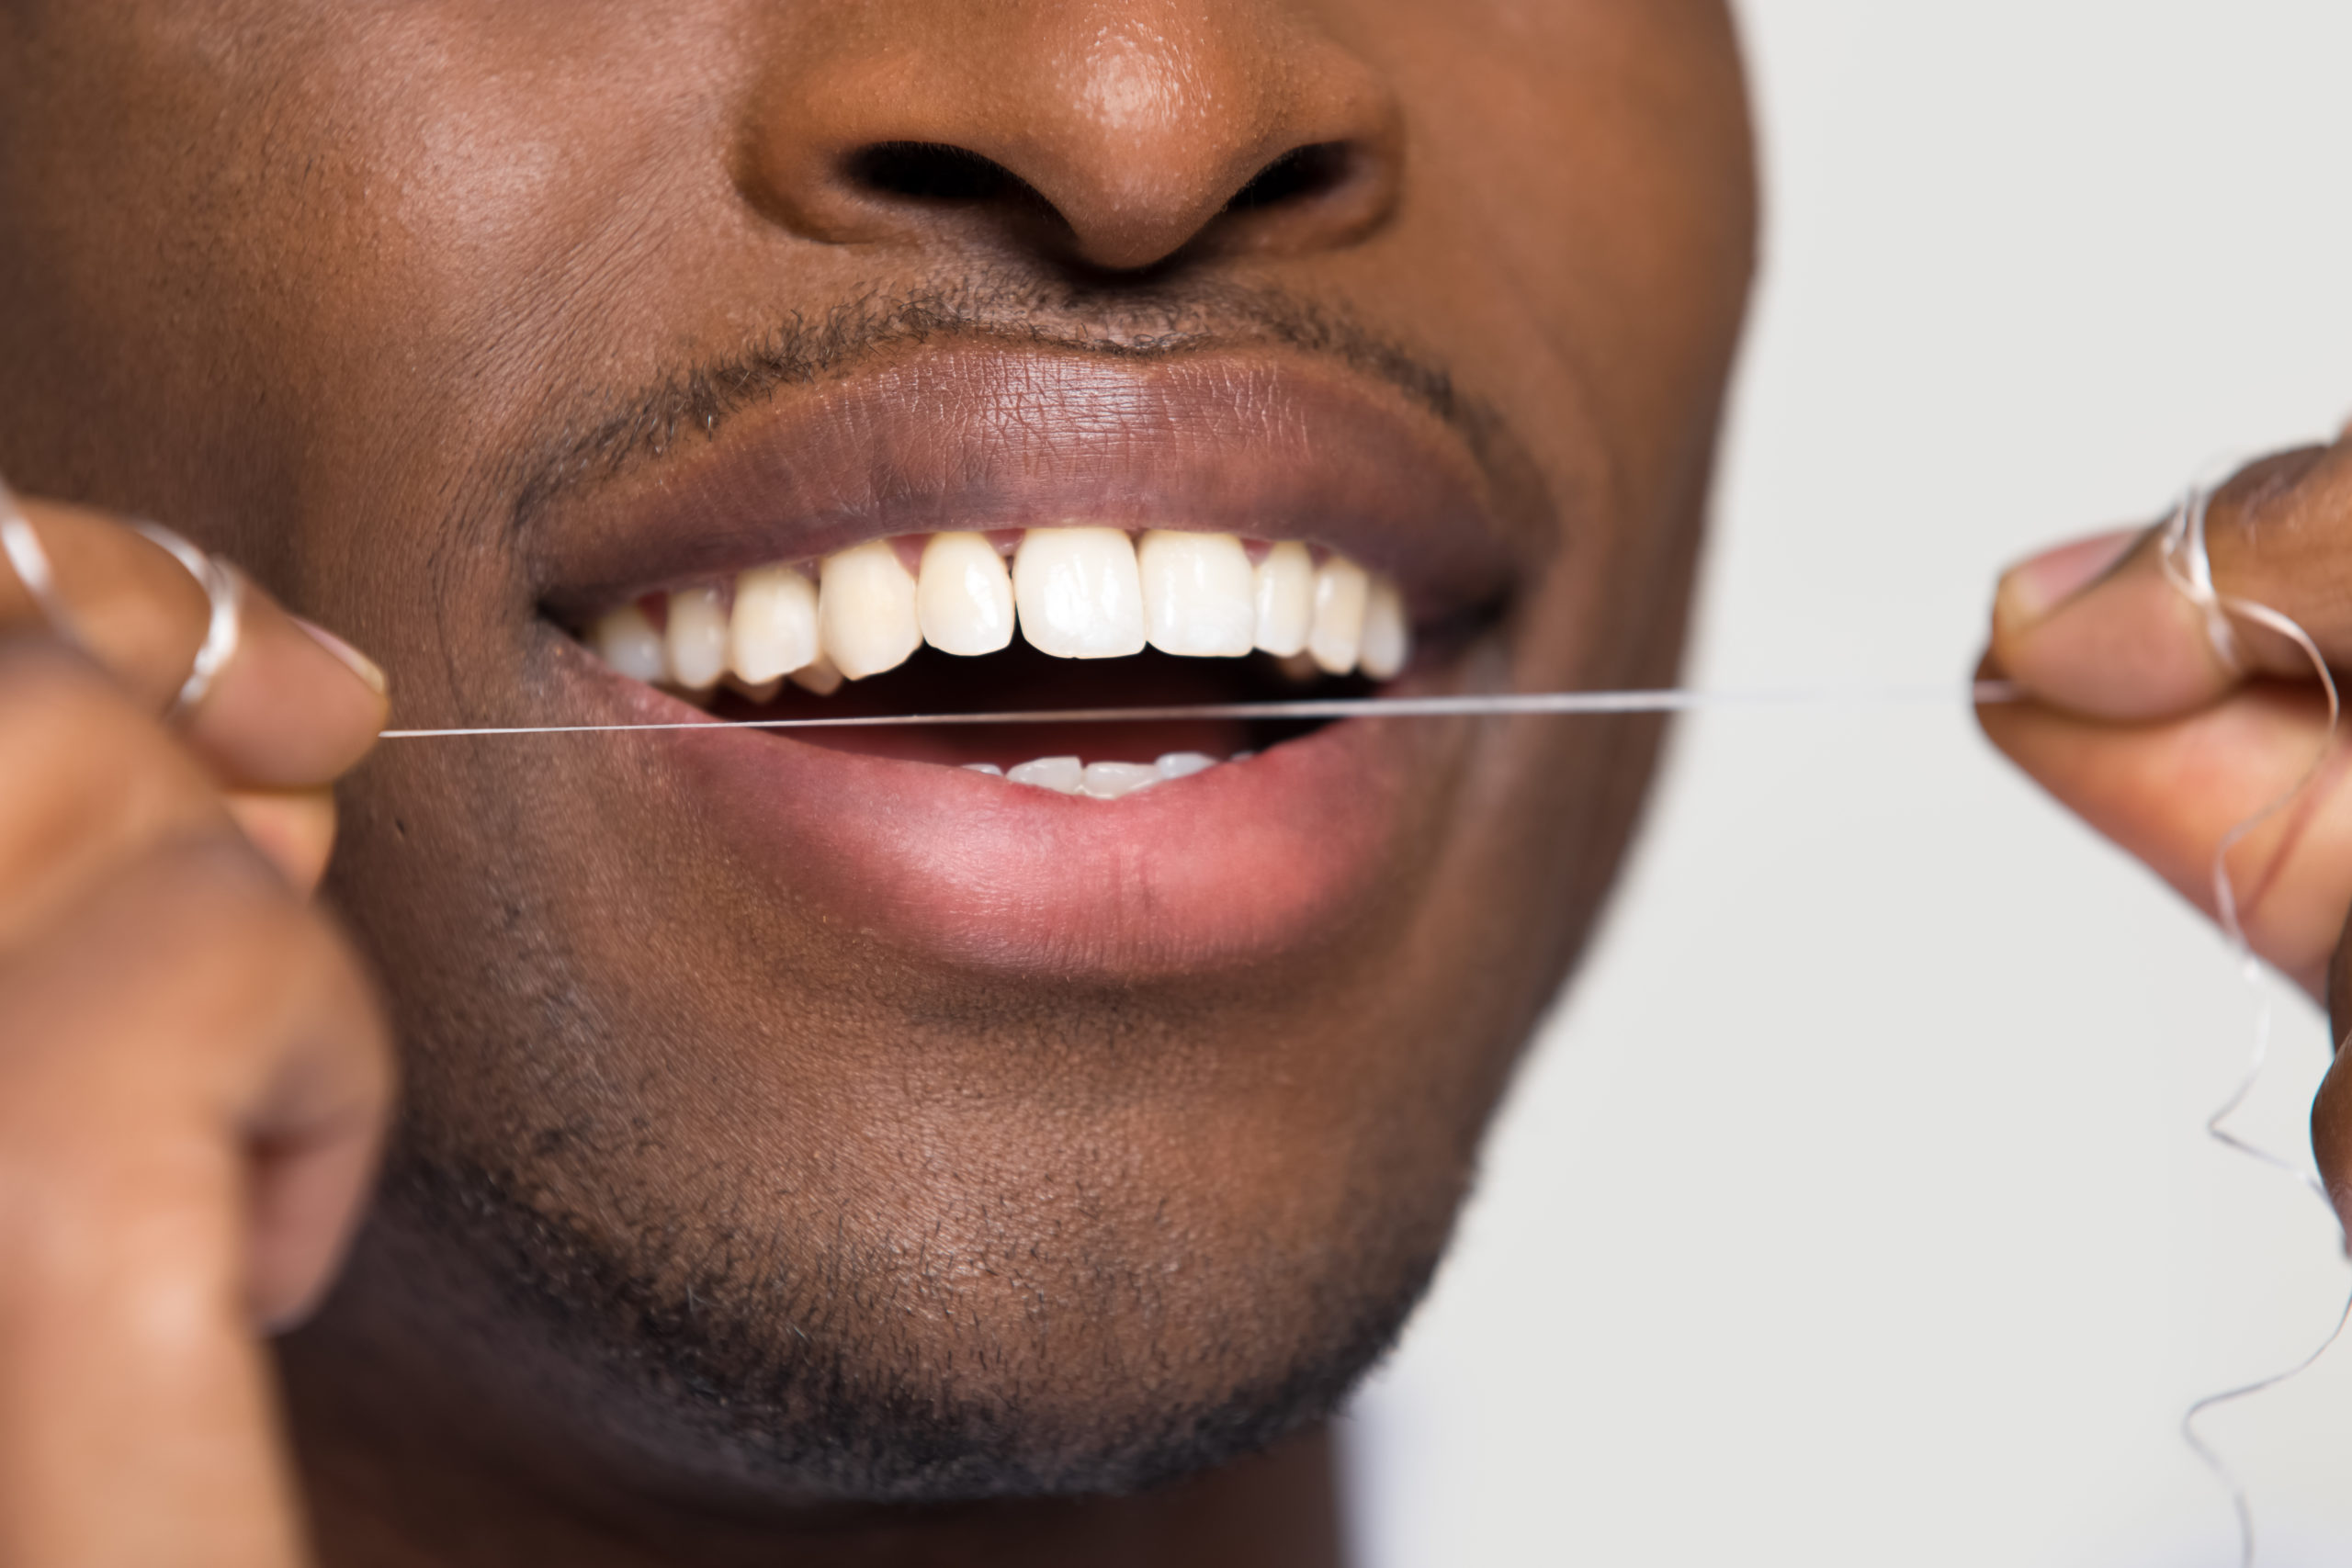 Flossing for Preventive Care | HealthDiscovery.org